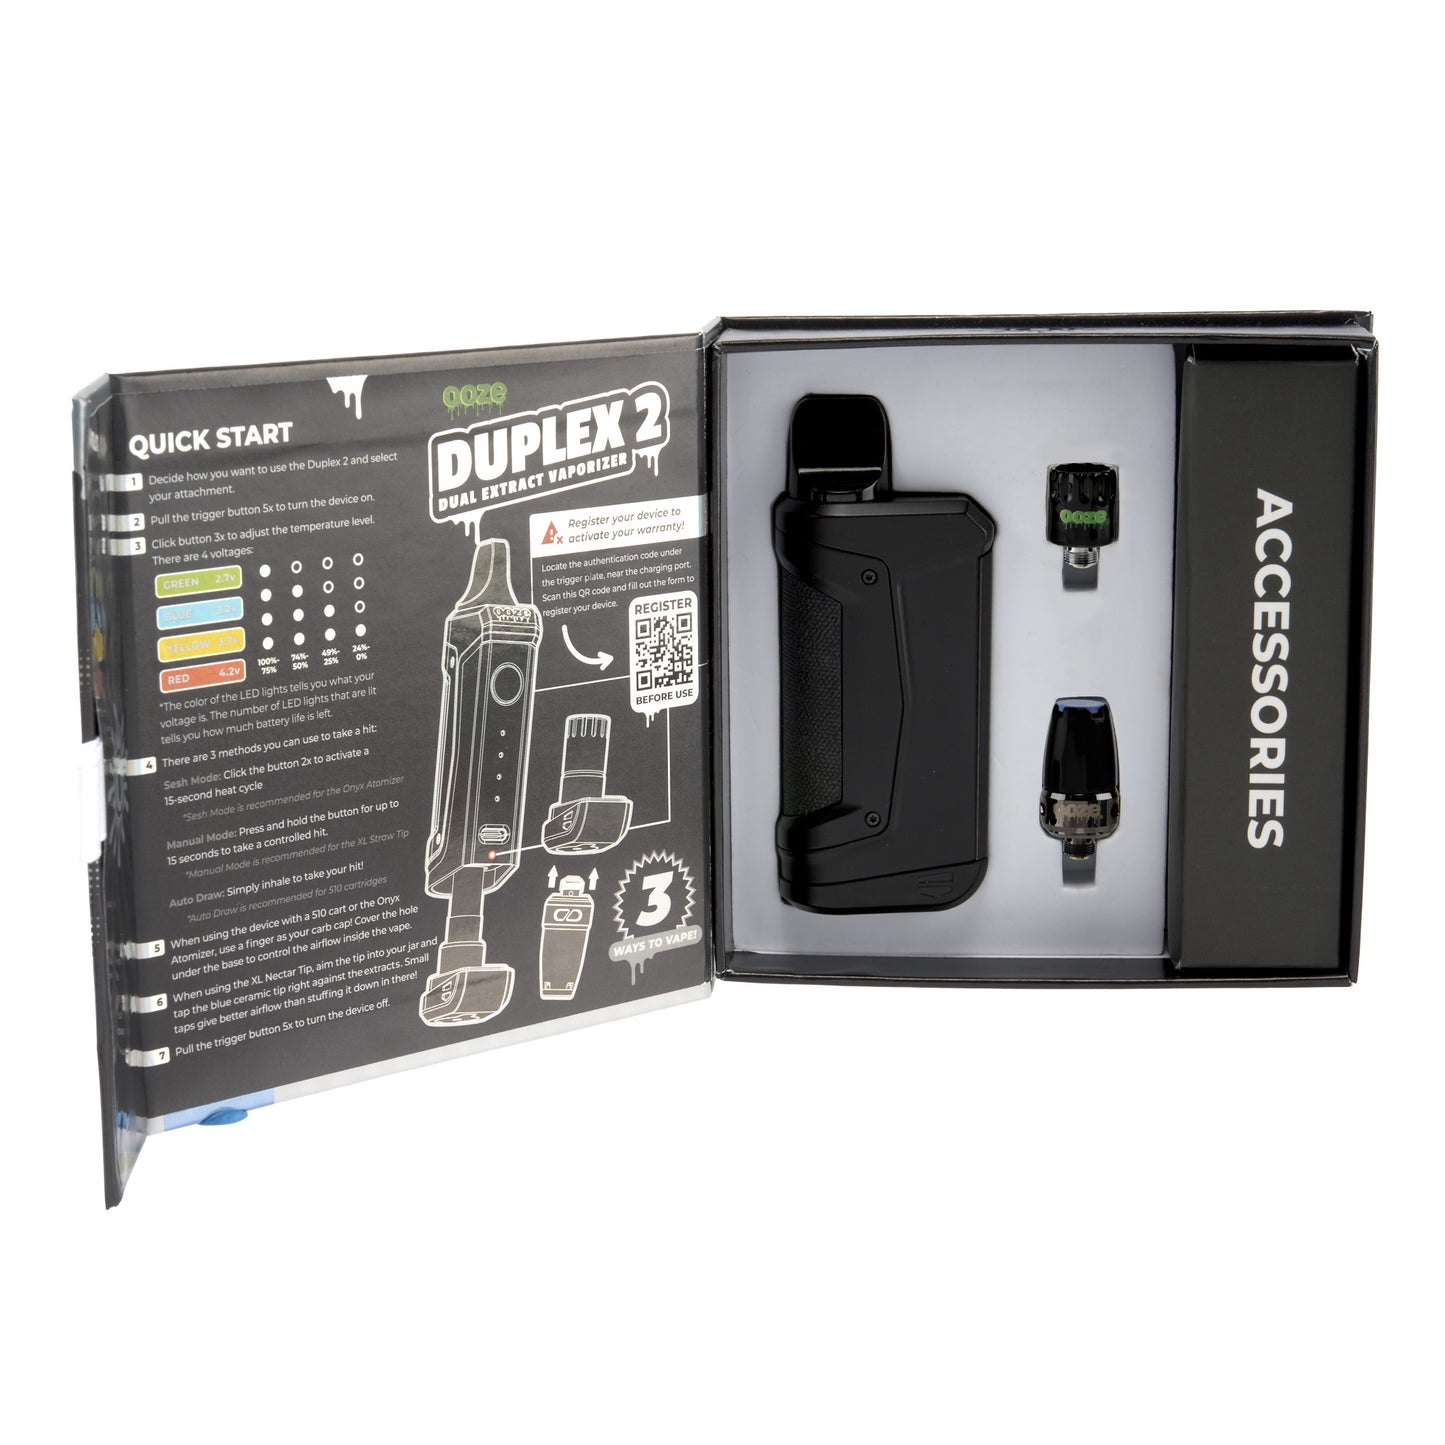 The panther black Ooze Duplex 2 extract vaporizer is shown in the box